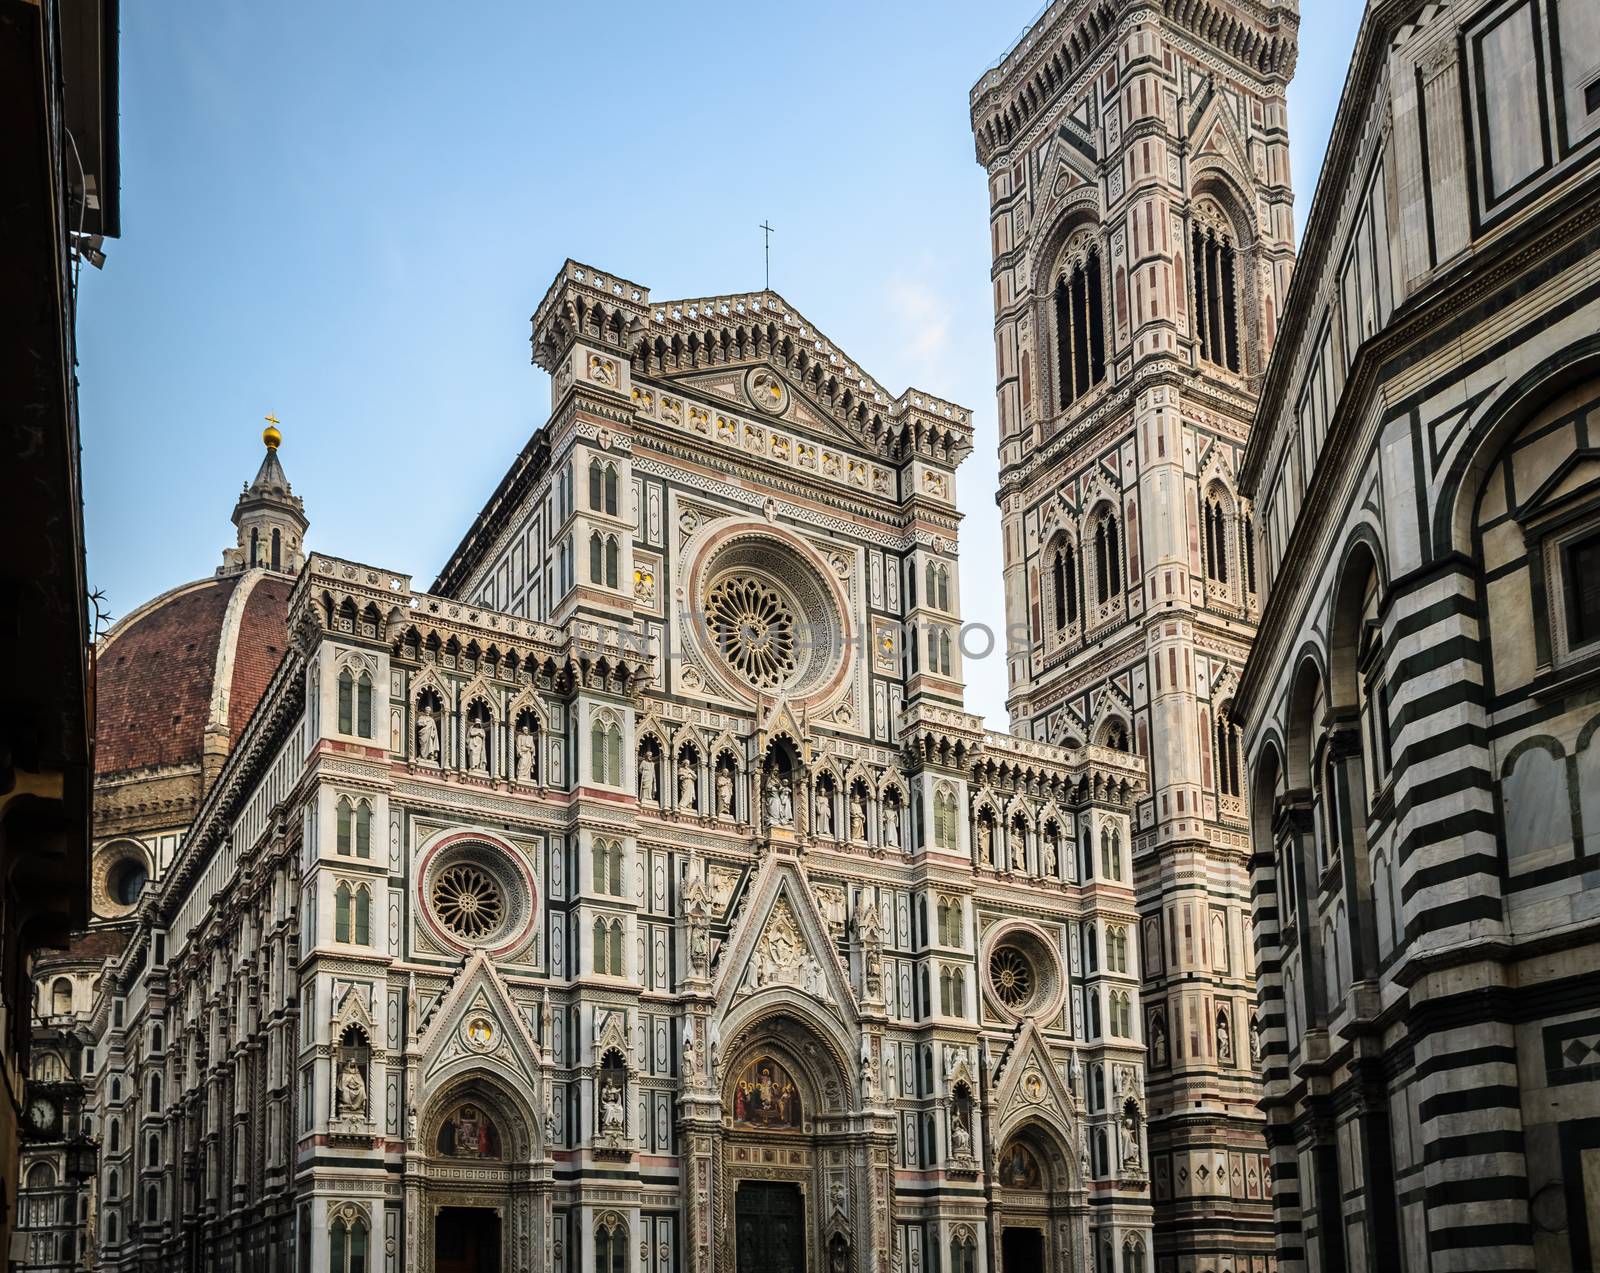 In the picture the Cathedral of Santa Maria del Fiore , Florence, Italy